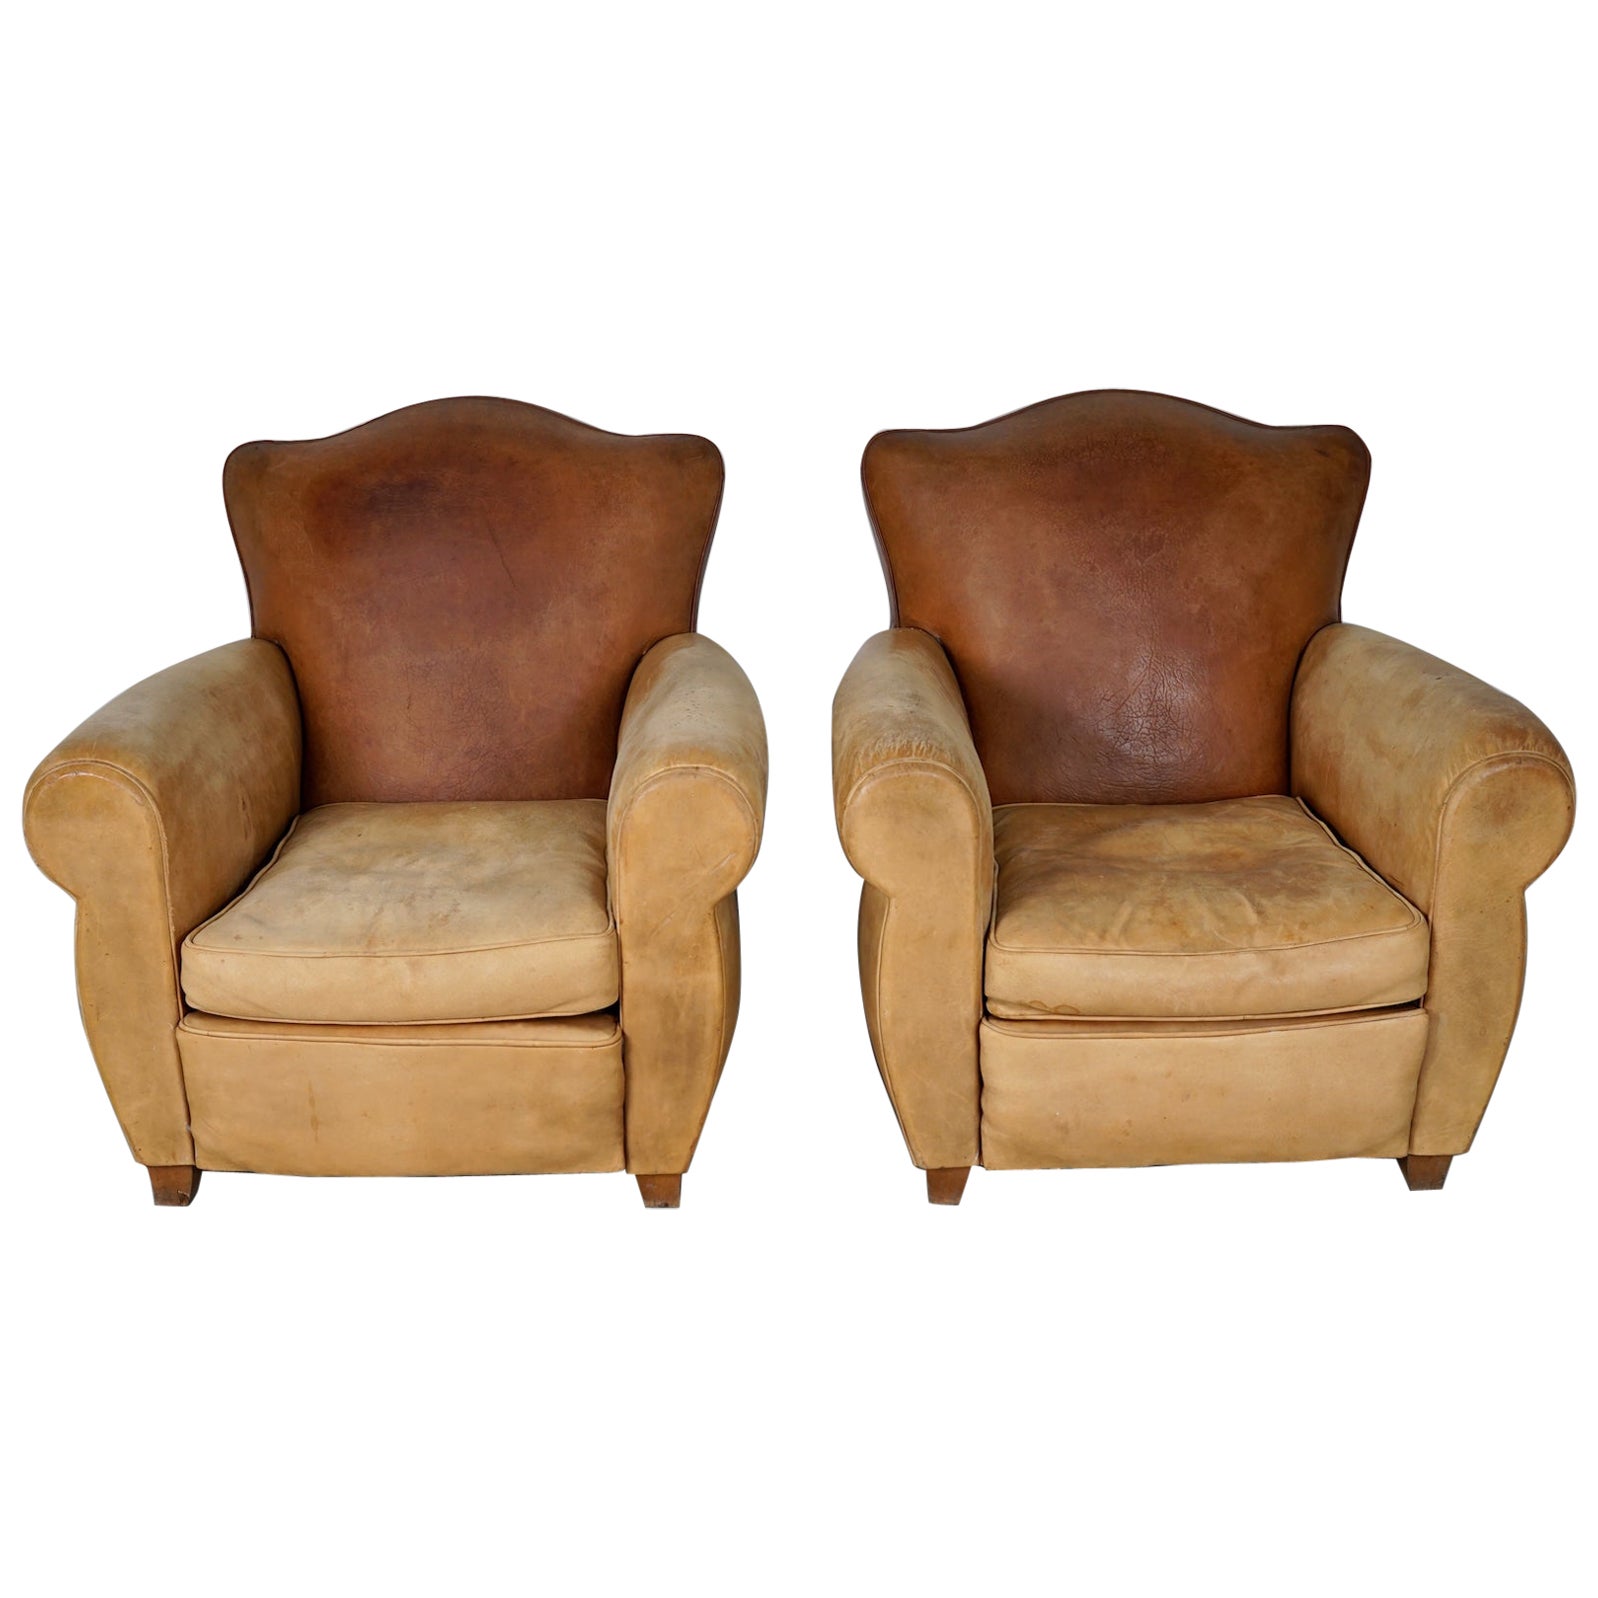  Pair of French Cognac Moustache Back Leather Club Chairs, 1940s